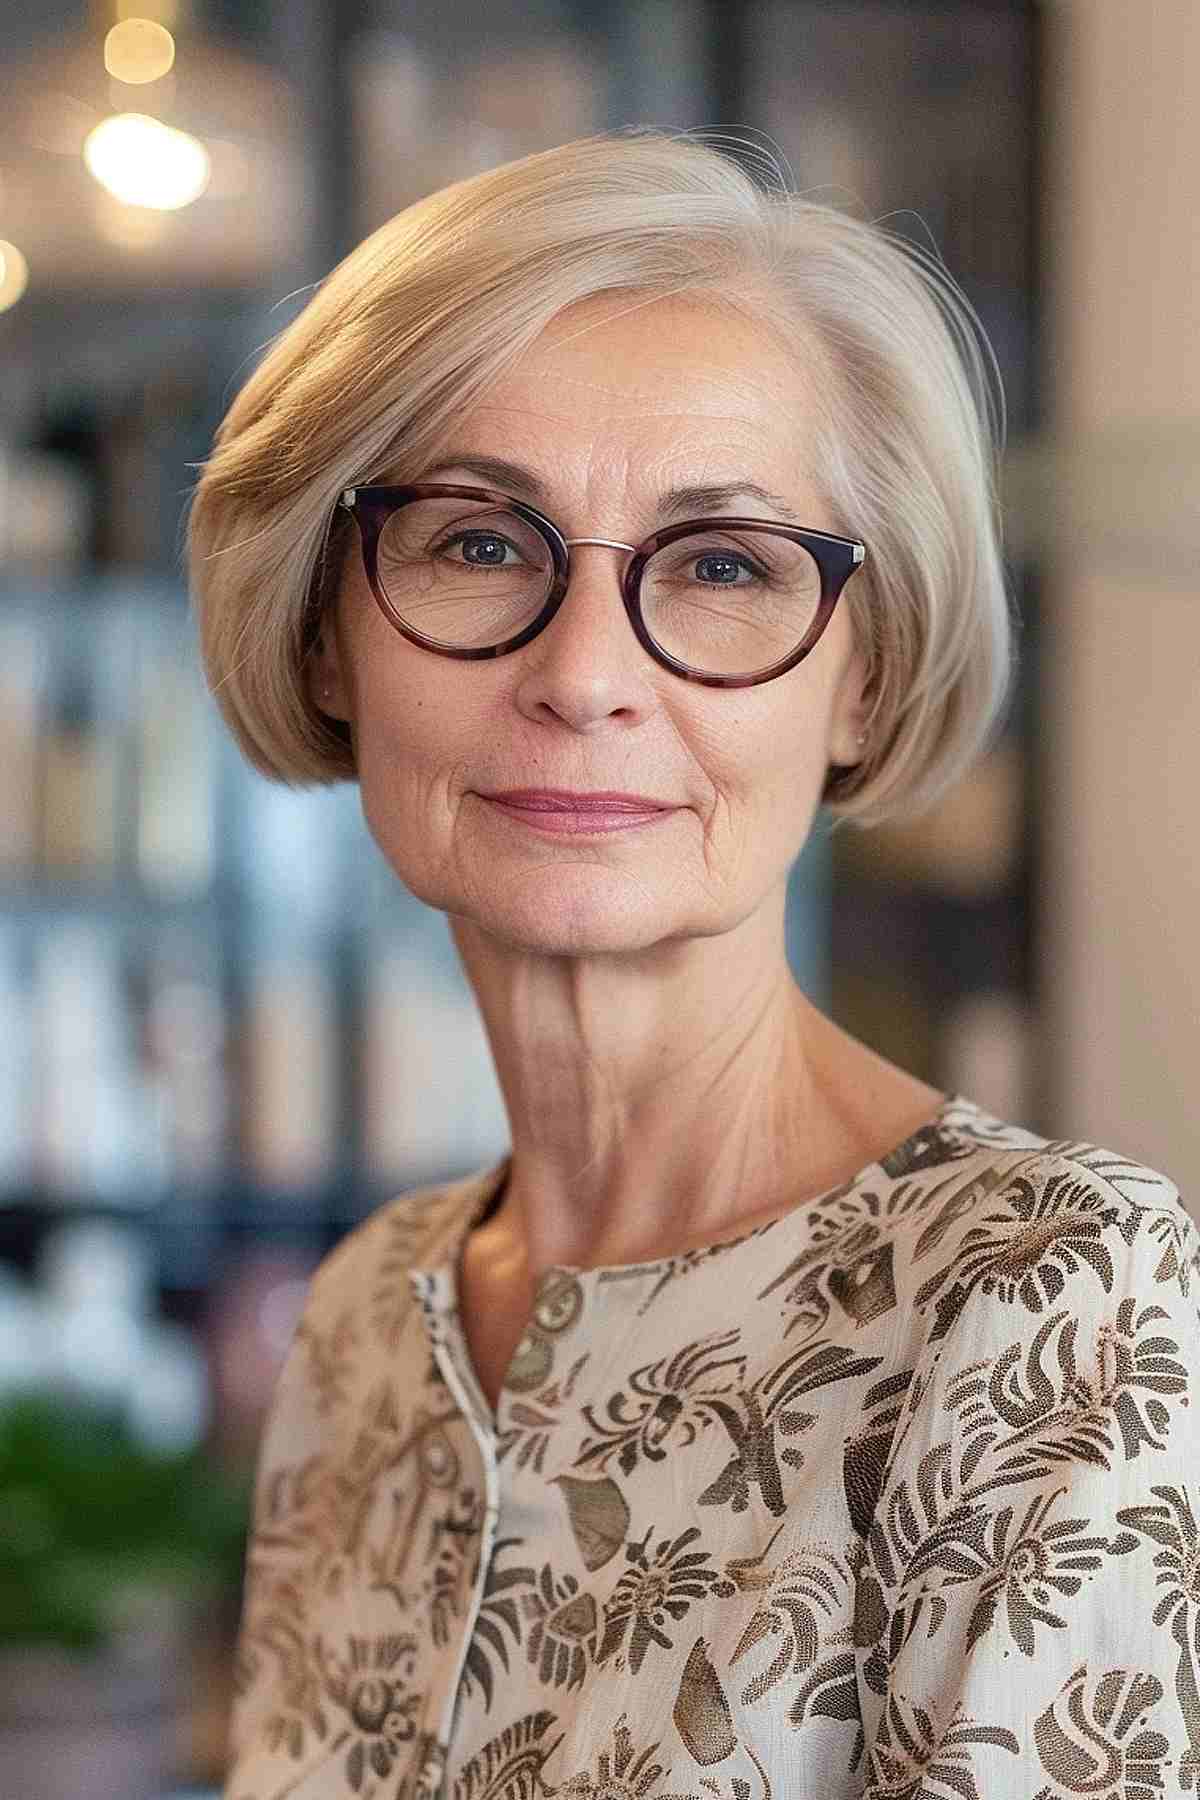 French Bob for Older Women with Glasses and Thin Hair